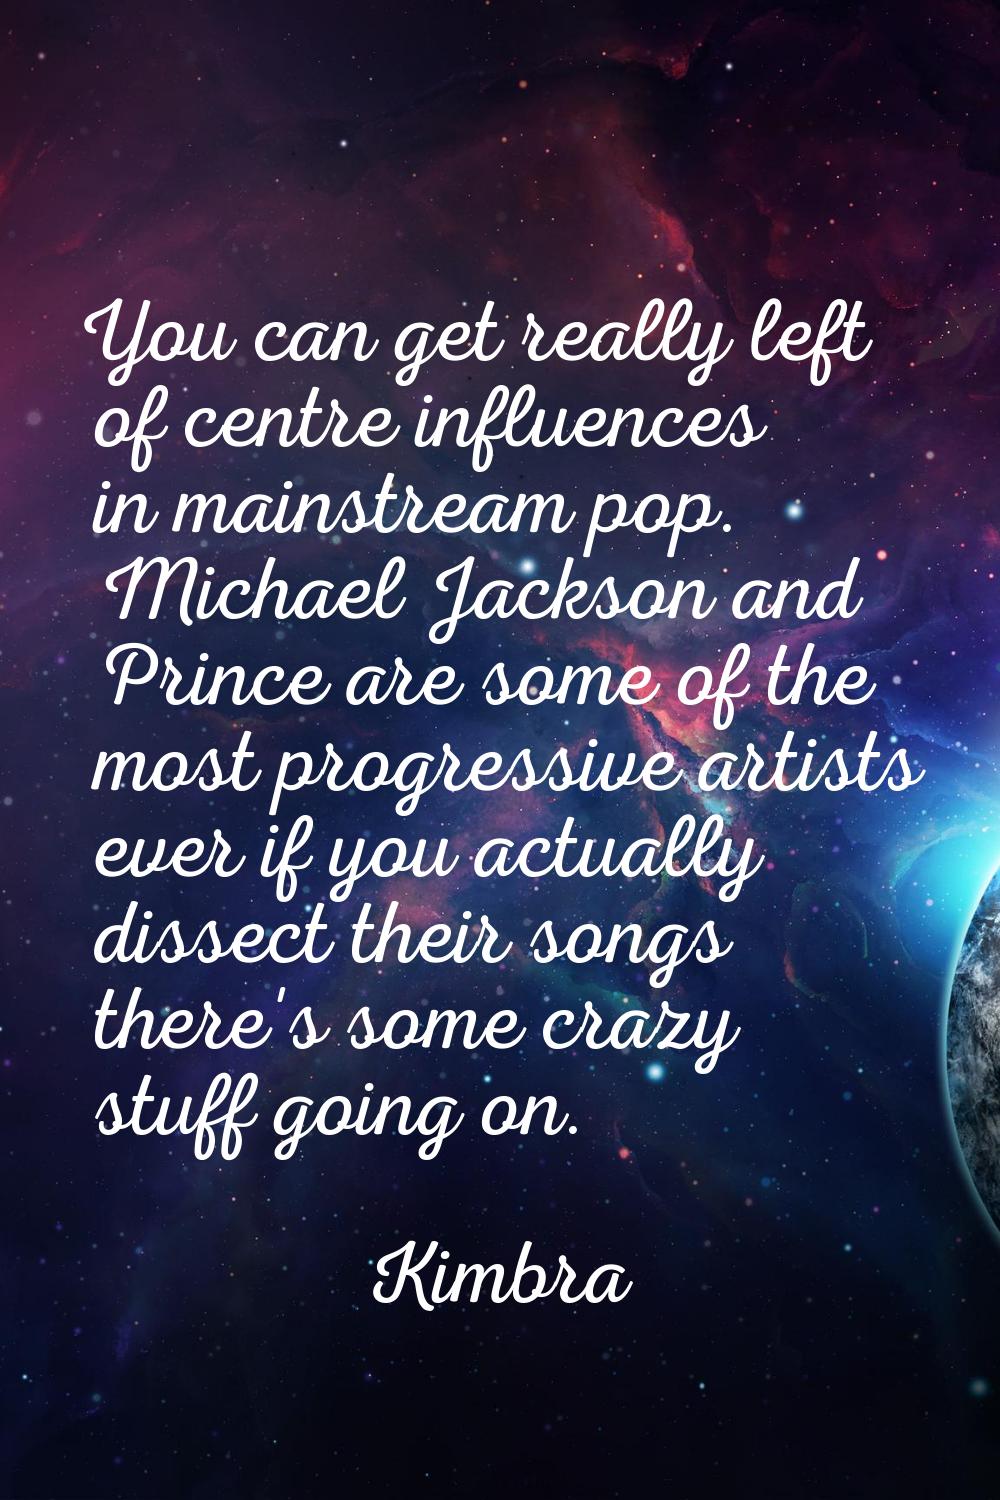 You can get really left of centre influences in mainstream pop. Michael Jackson and Prince are some